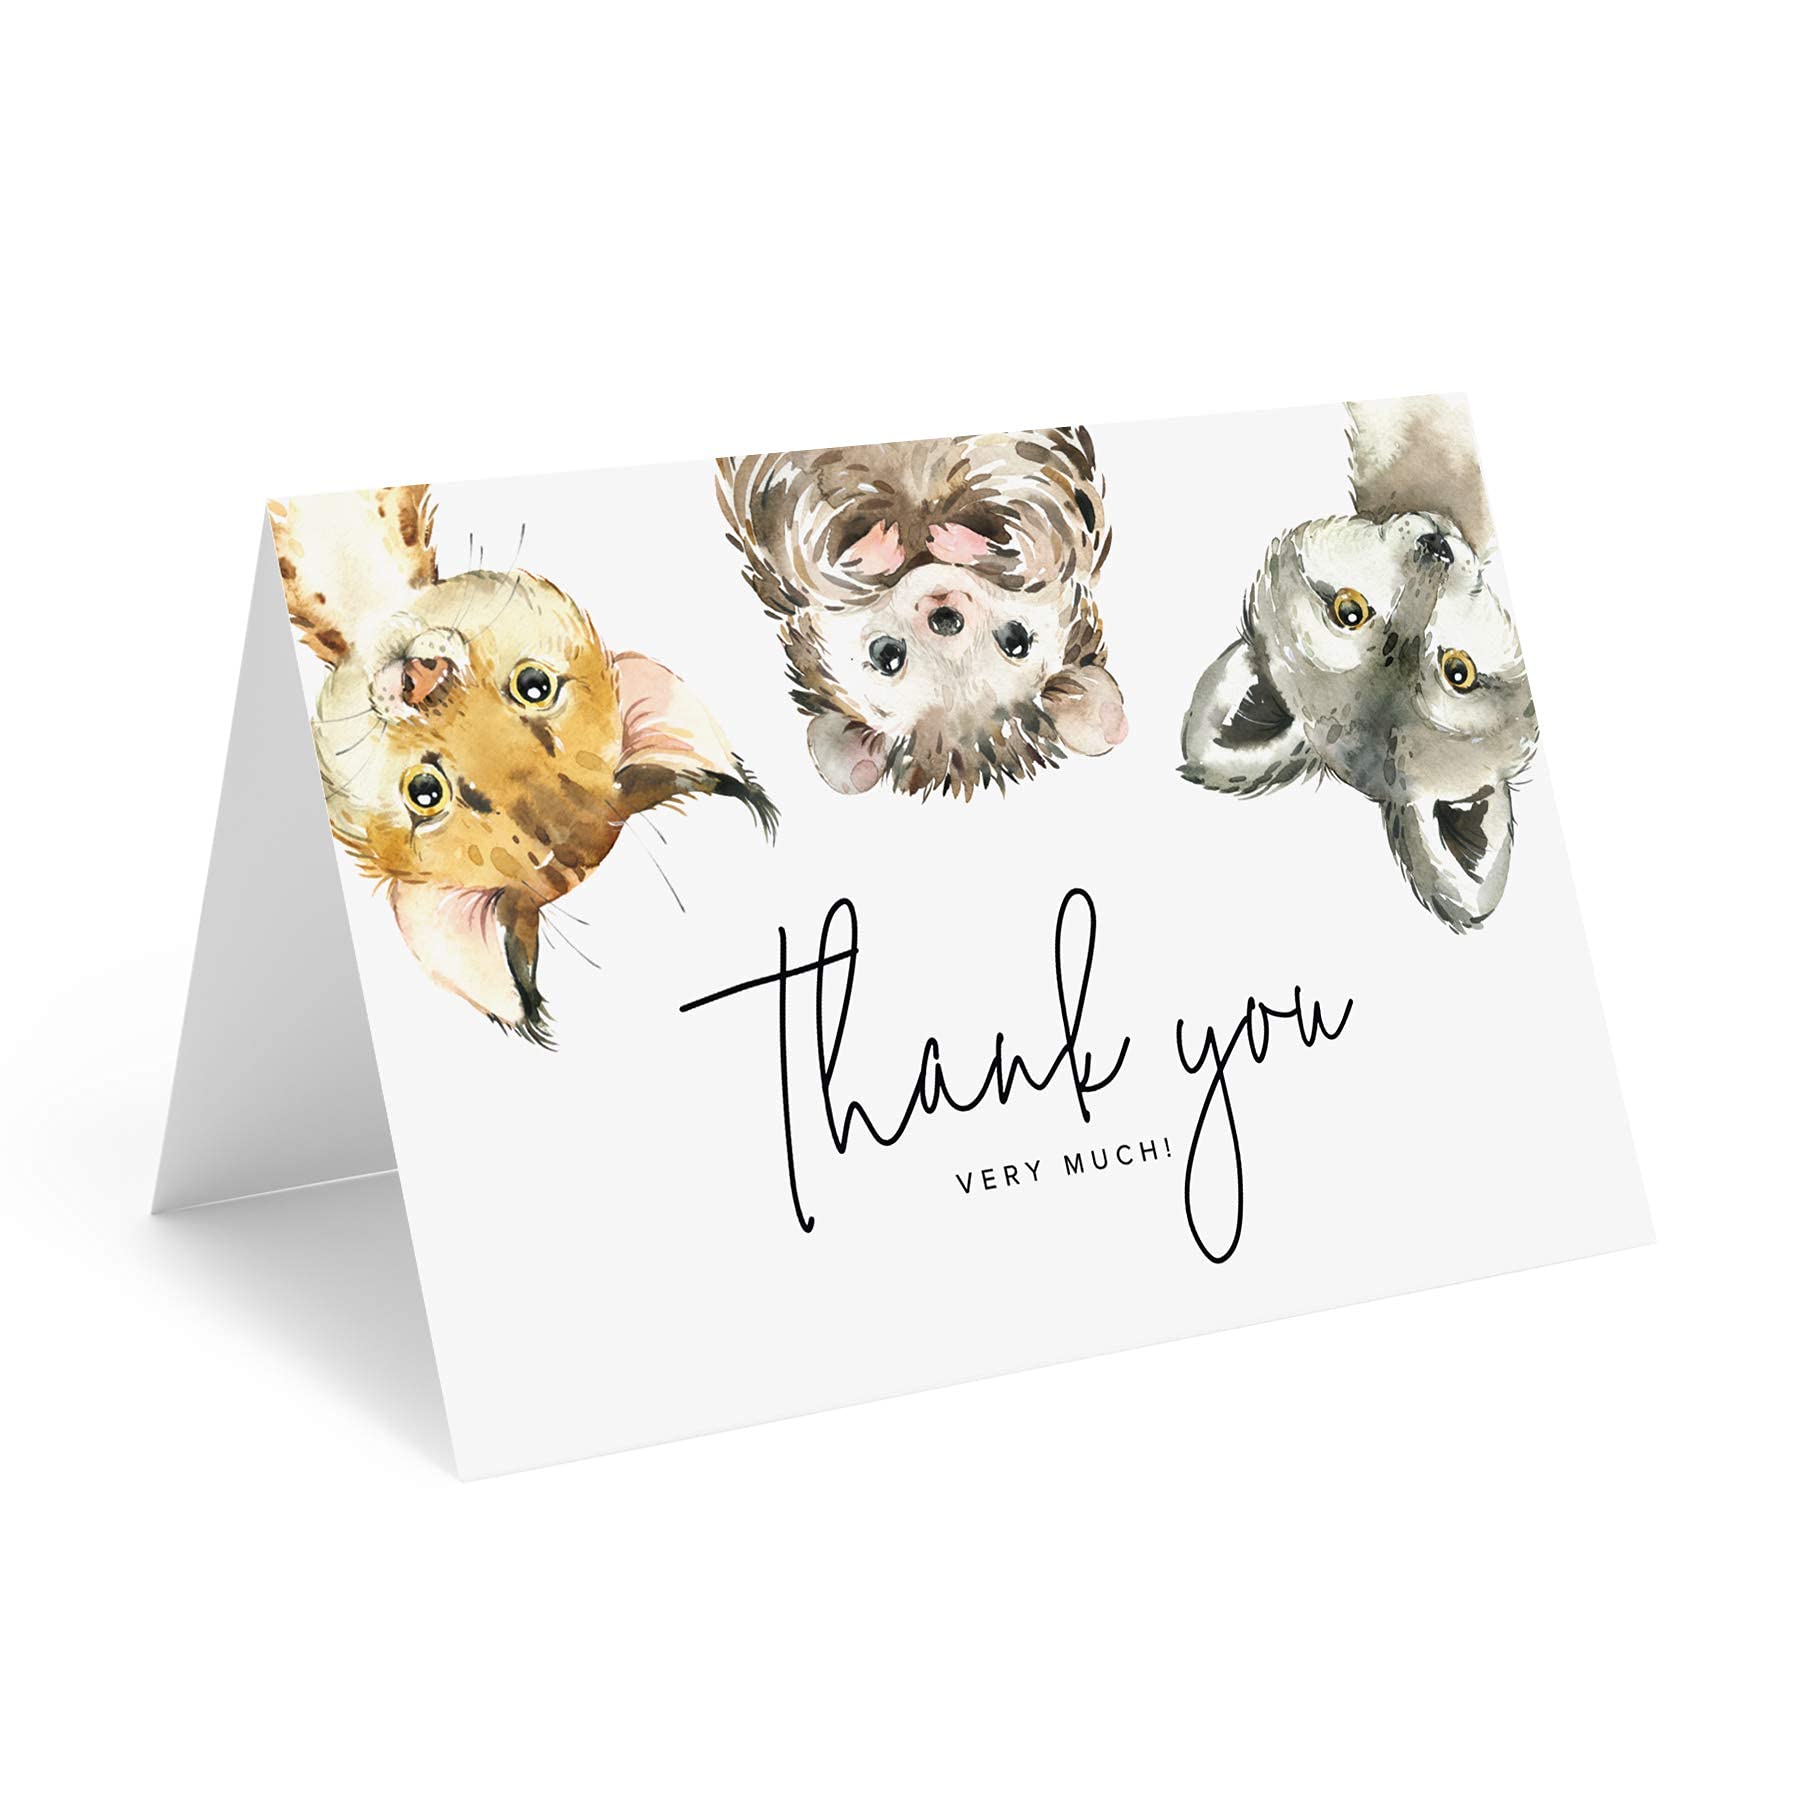 Bliss Collections Thank You Cards with Envelopes, Woodland Animal, All-Occasion Thank You Cards for Weddings, Bridal Showers, Baby Showers, Birthdays, Parties and Special Events, 4